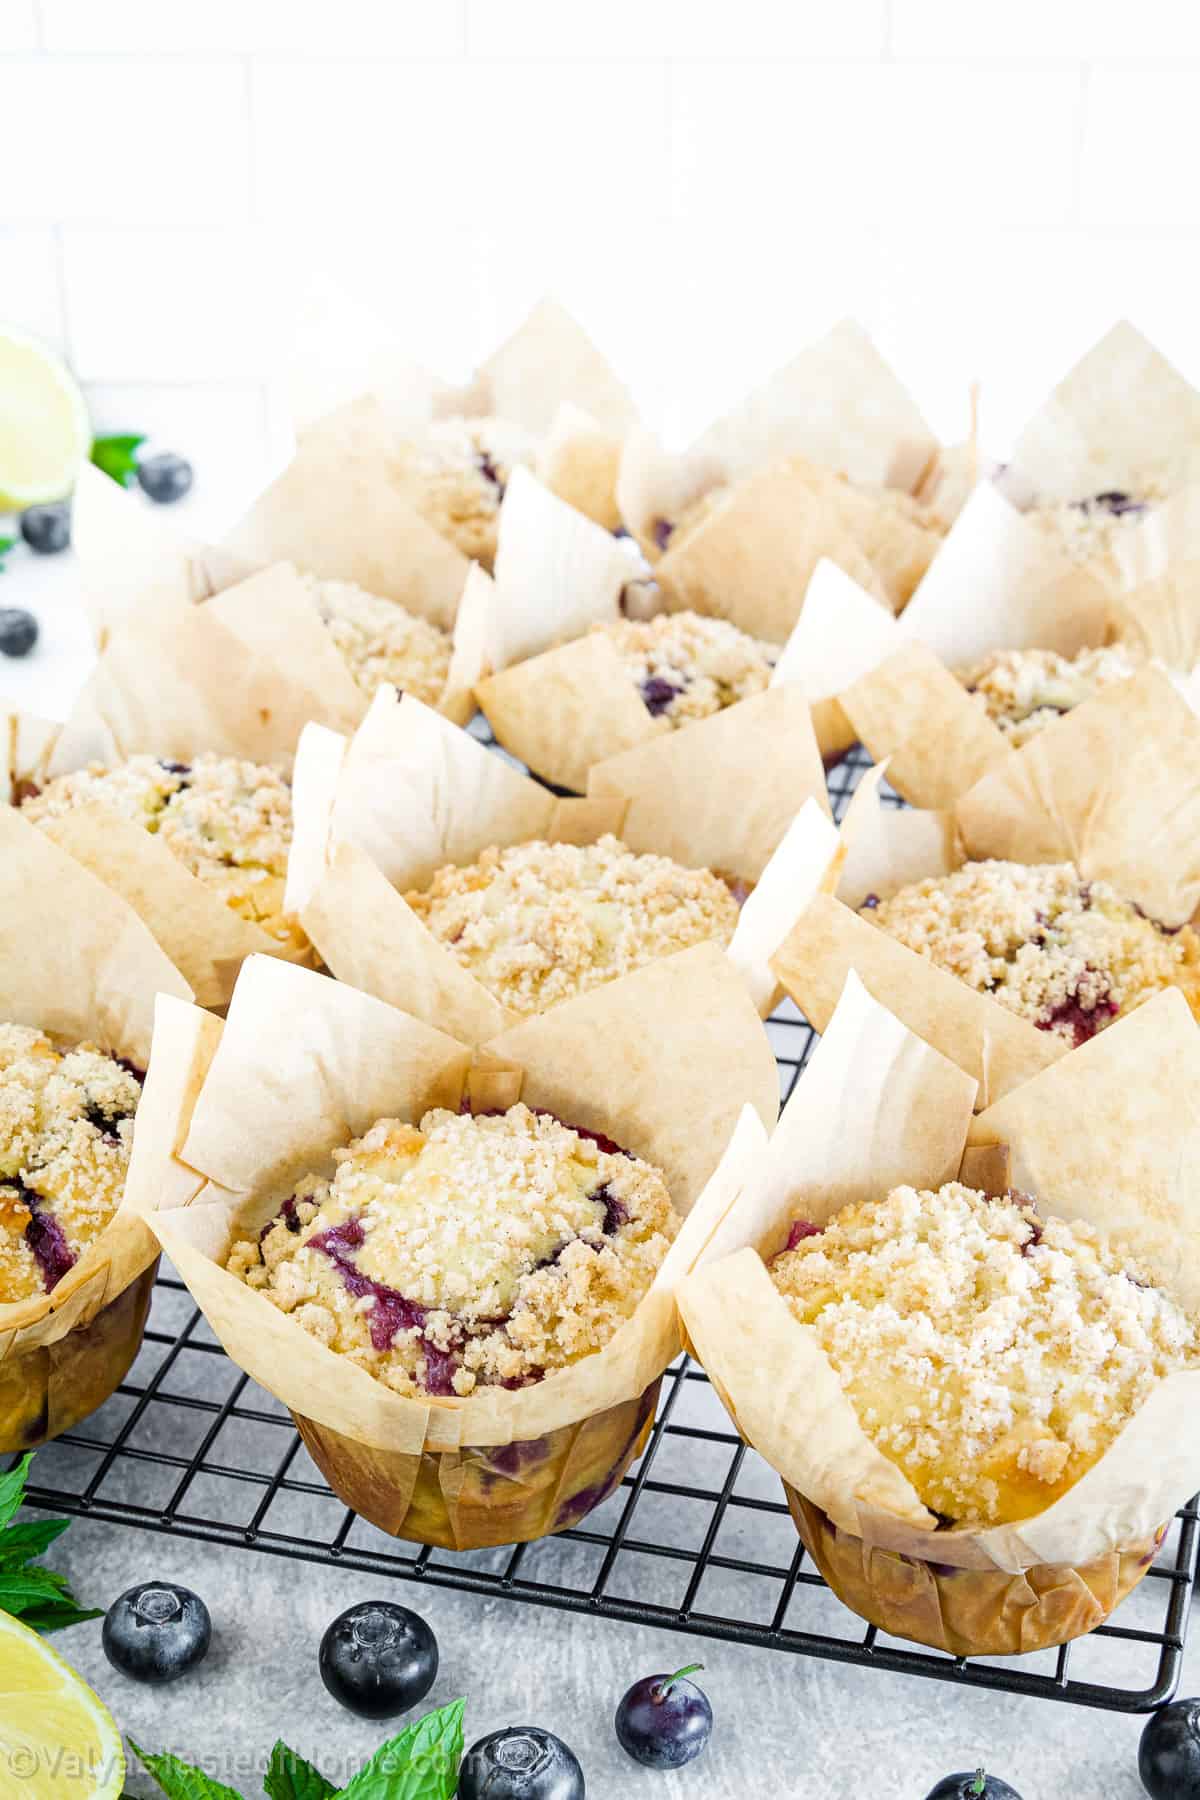 The key to making muffins lies in a fine balance of flavors and textures.